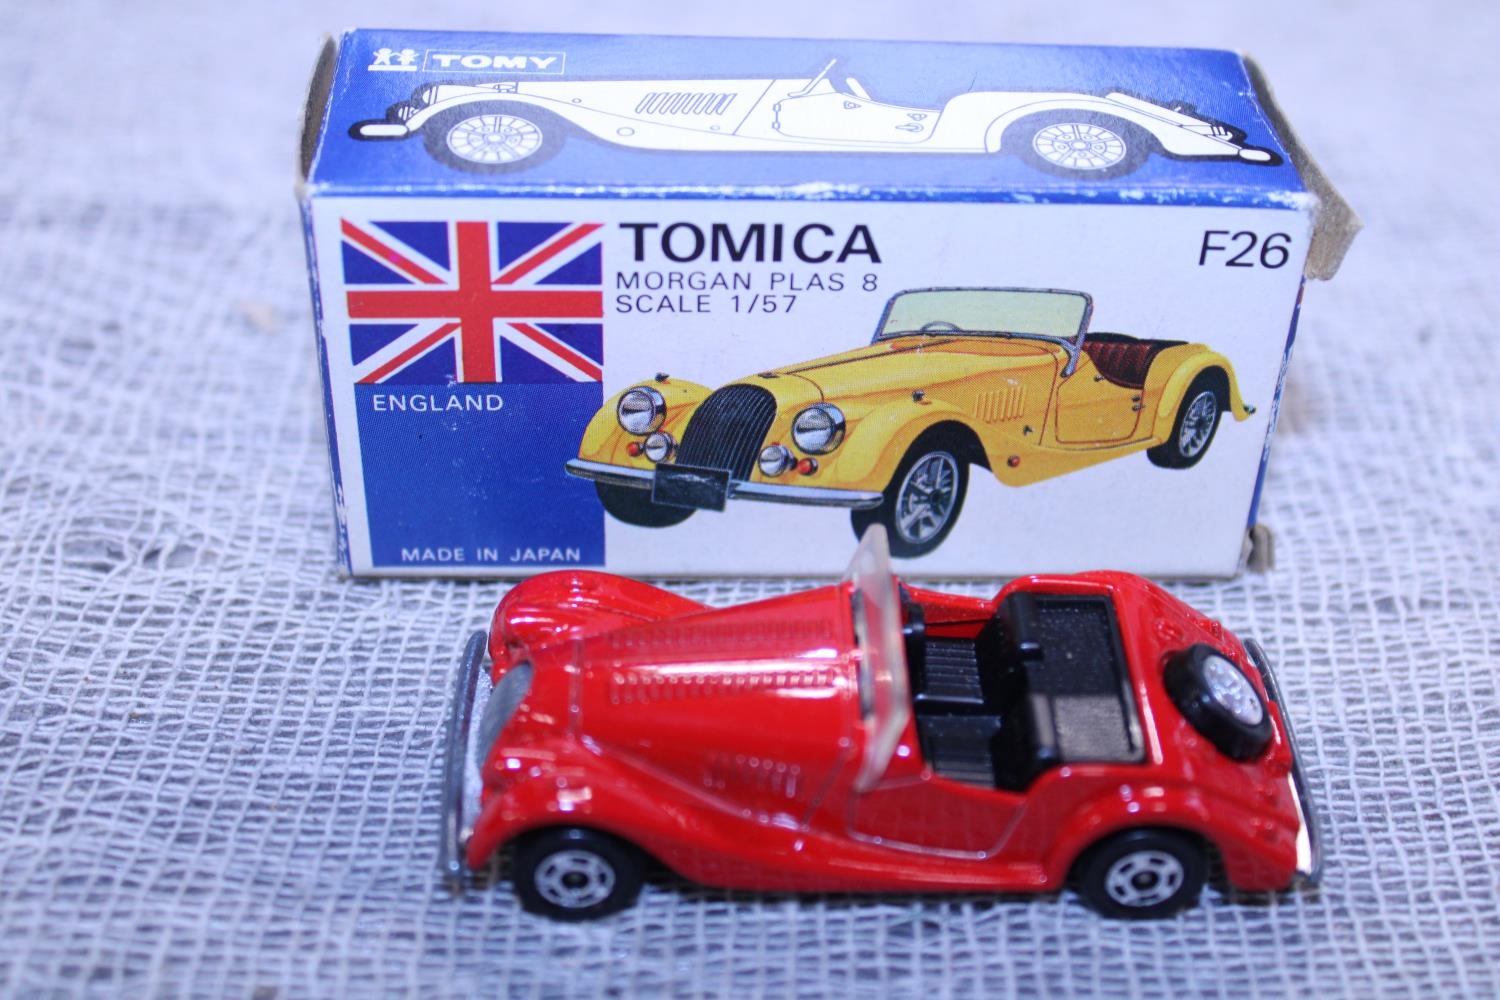 A boxed Tomica F26 die-cast model